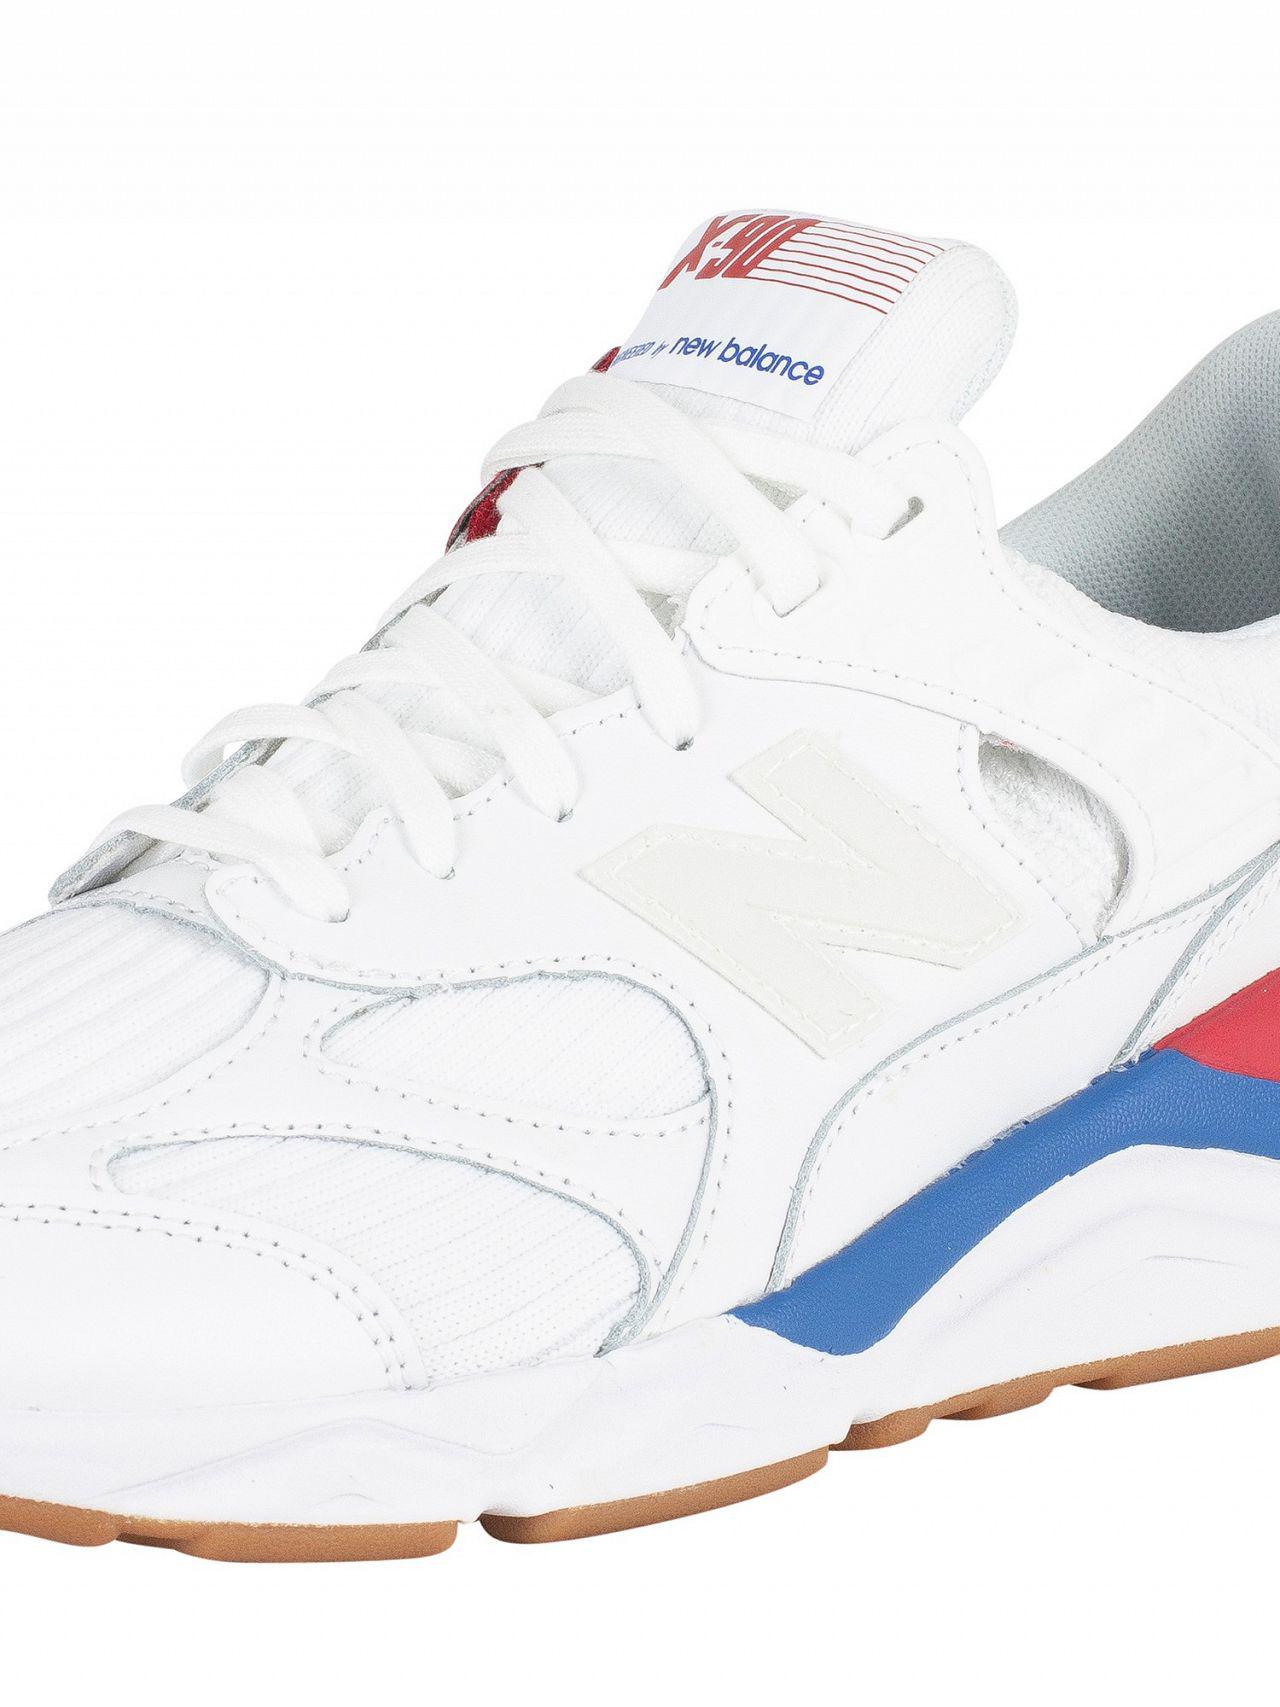 New Balance White/blue/red X-90 Trainers for Men | Lyst